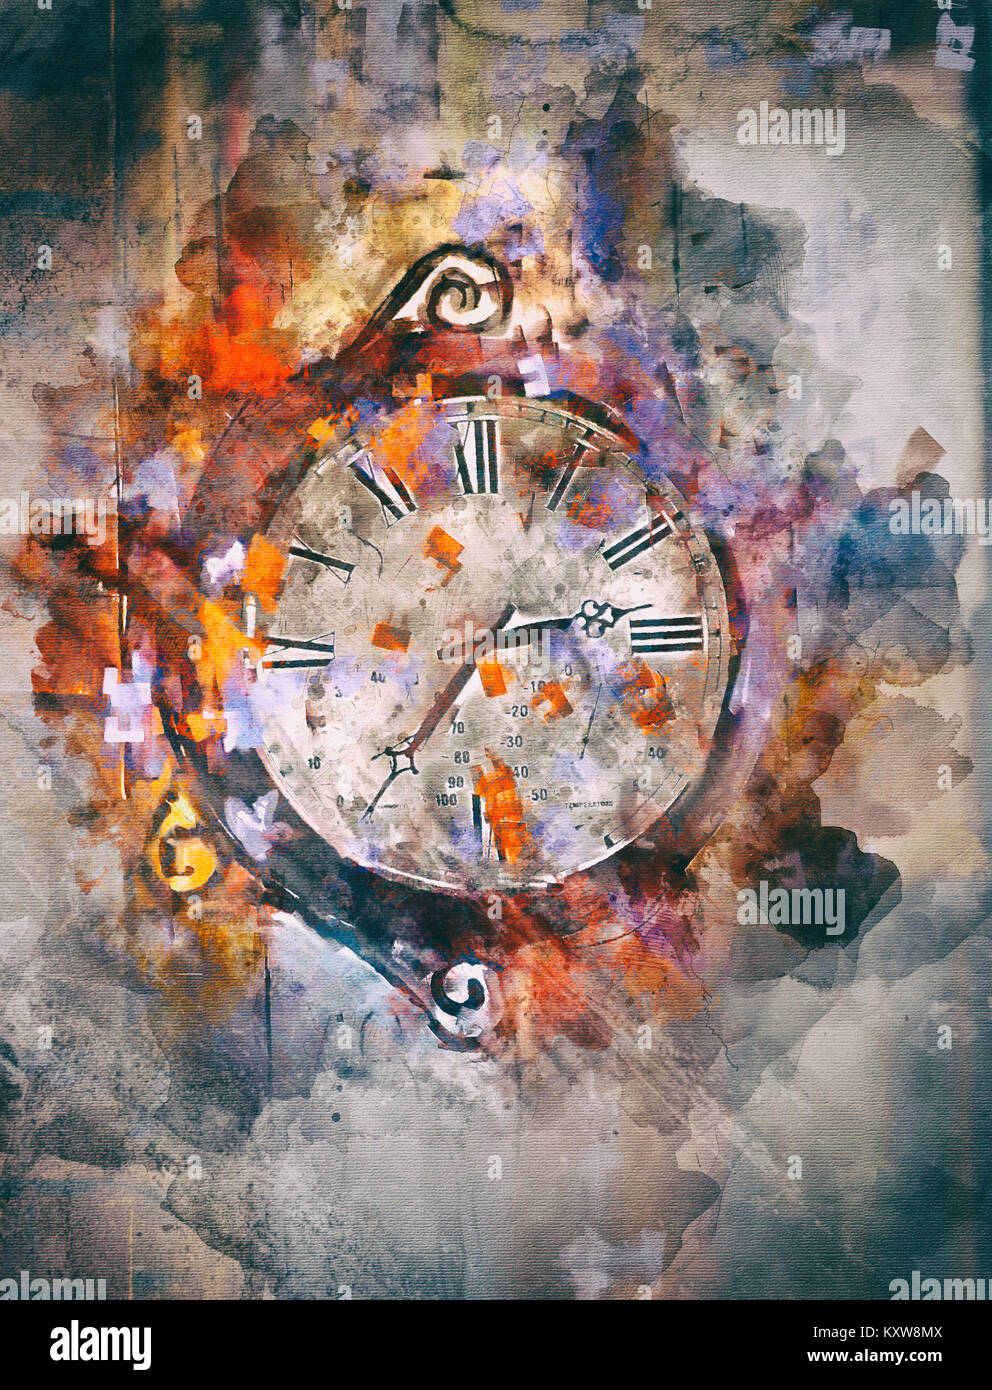 Time, art acrylic painting on paper and mixed media, abstract background Stock Photo